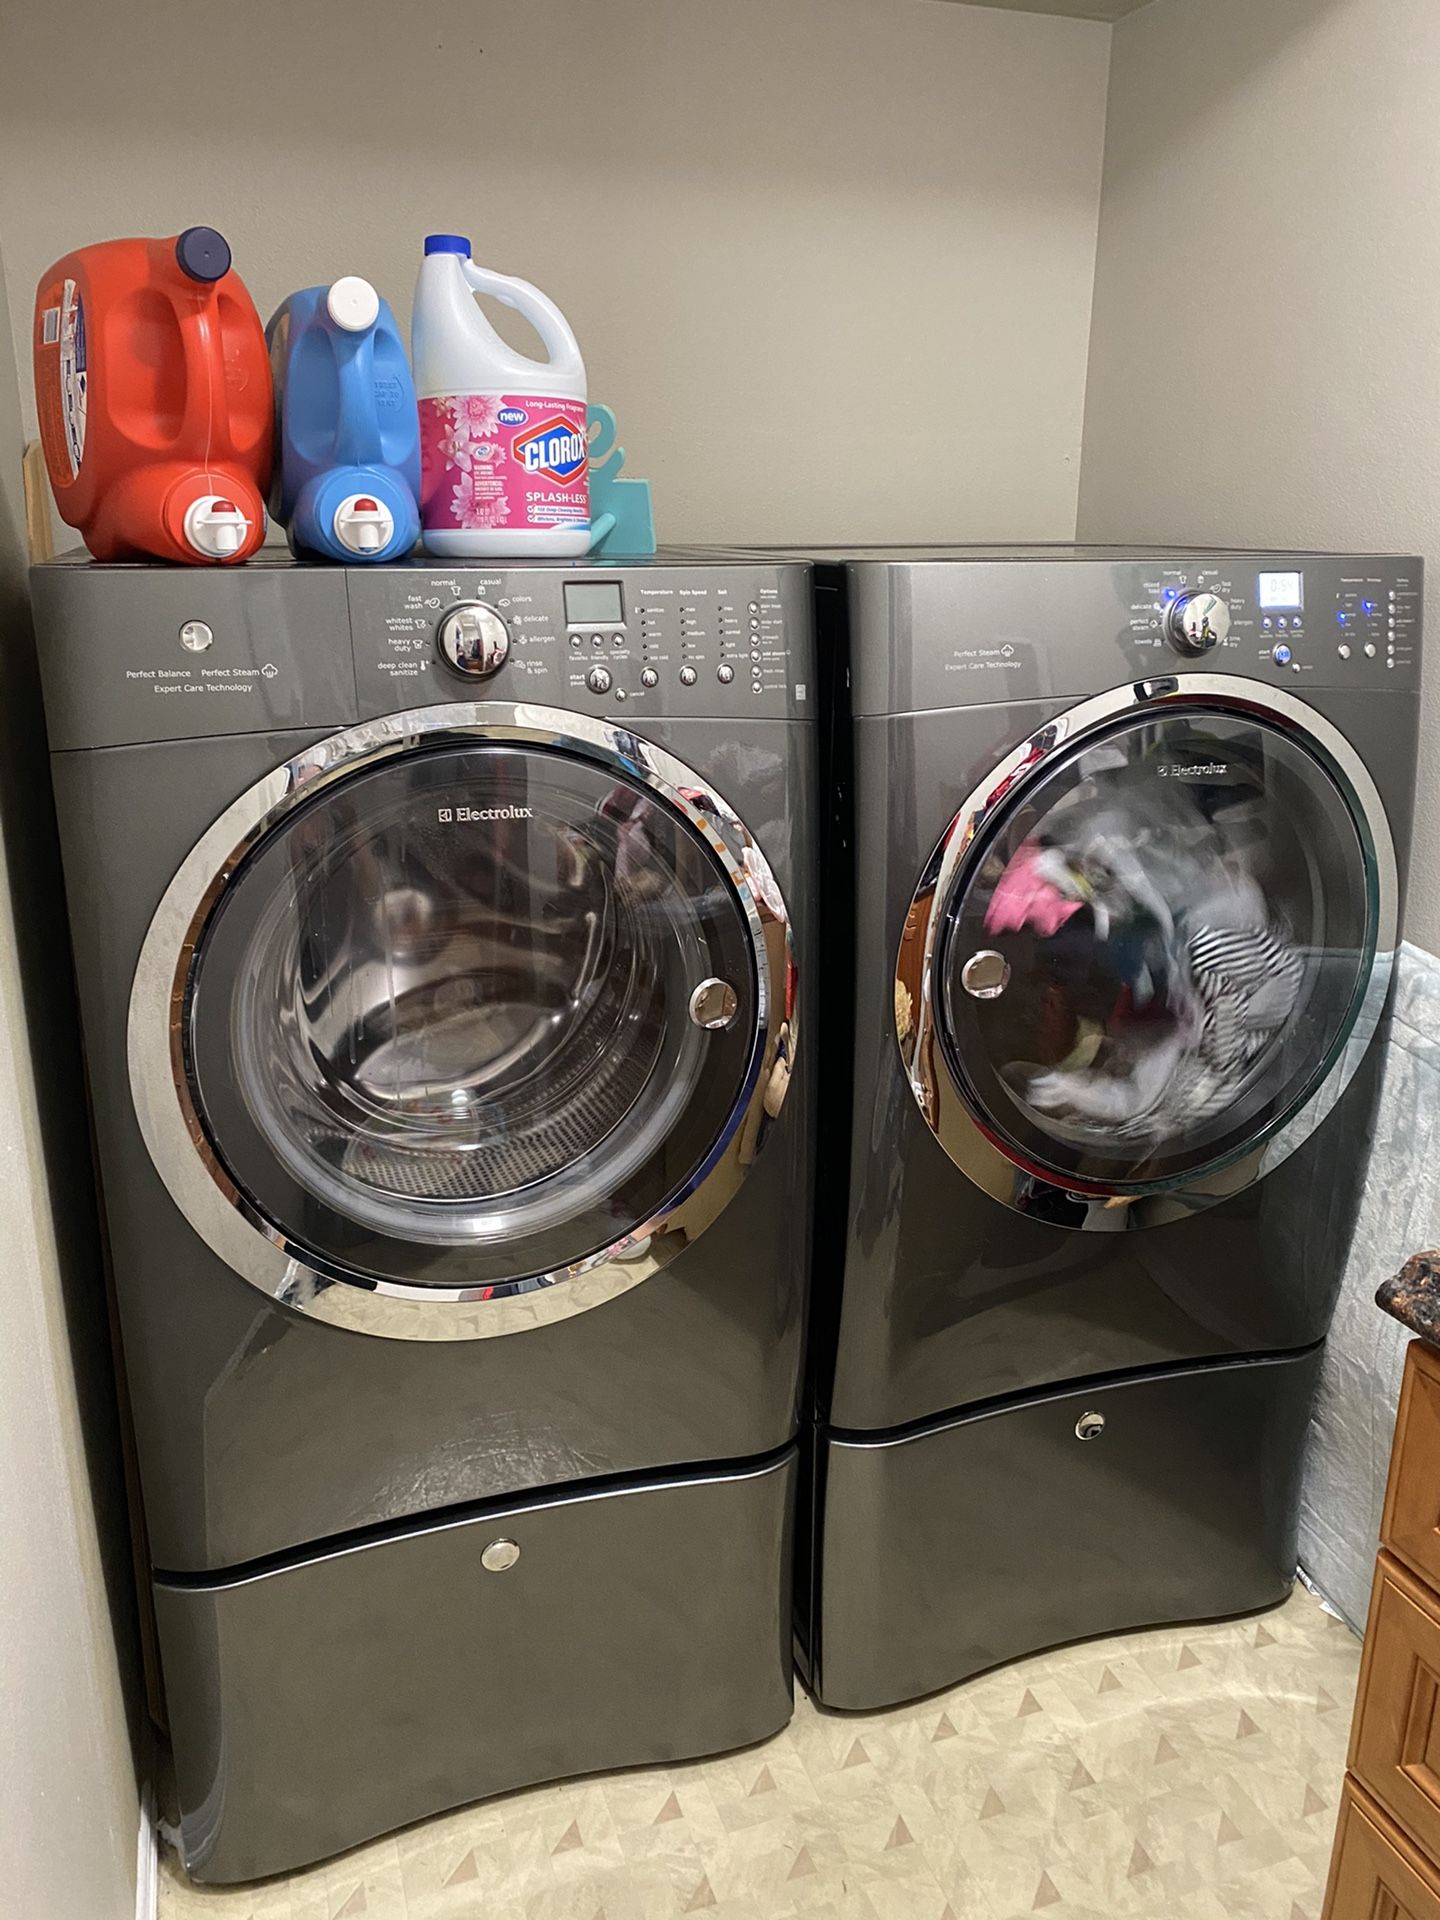 Electrolux washer and dryer with pedestals